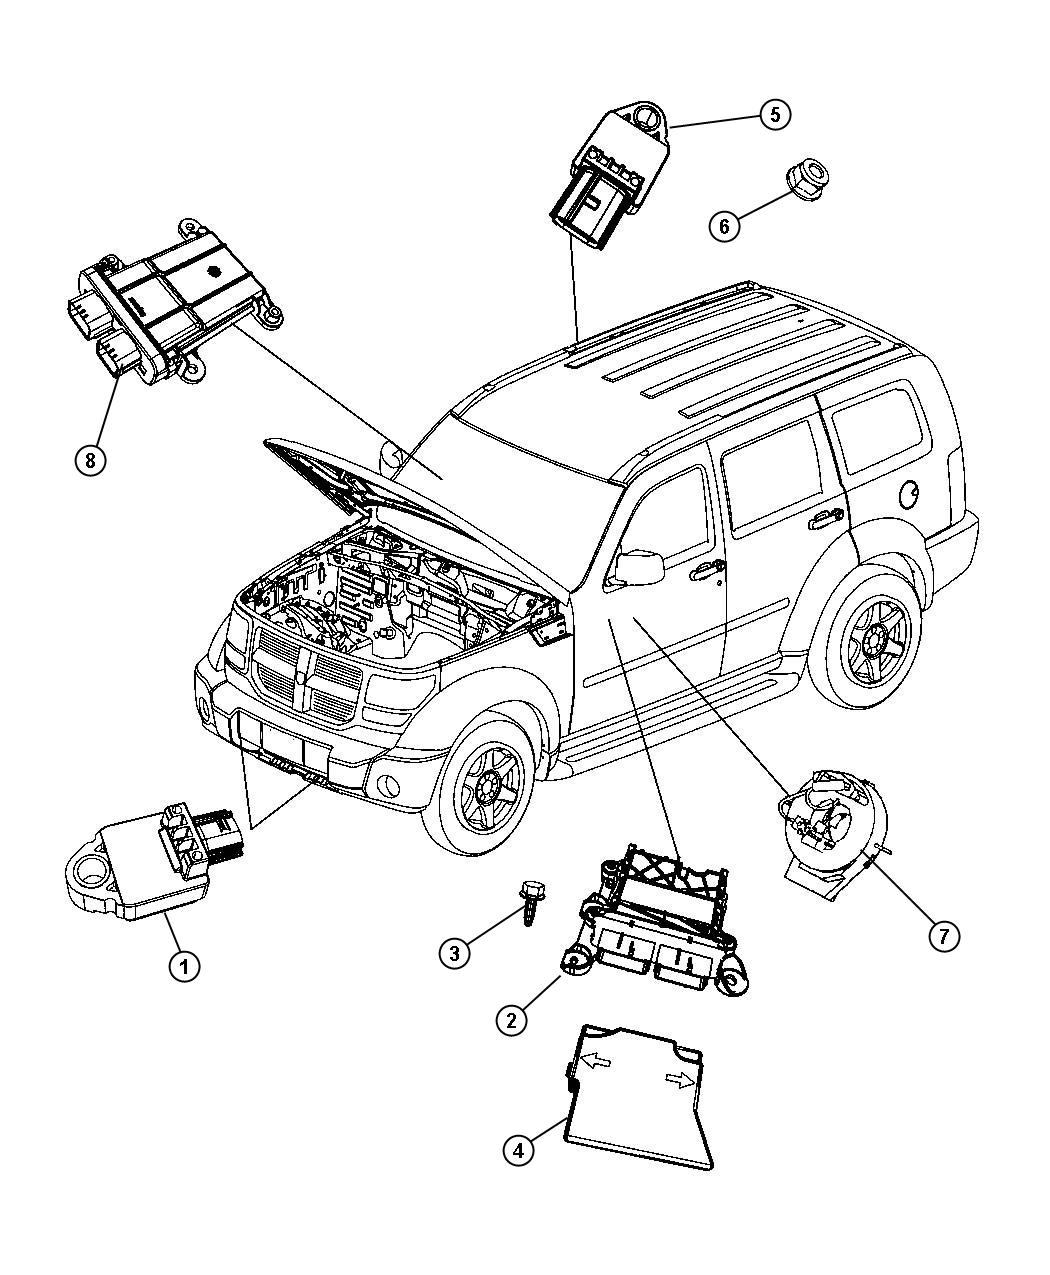 2003 Jeep Liberty Tail Light Wiring Diagram - Wiring Diagram Schemas 2003 Jeep Liberty Tail Light Wiring Diagram